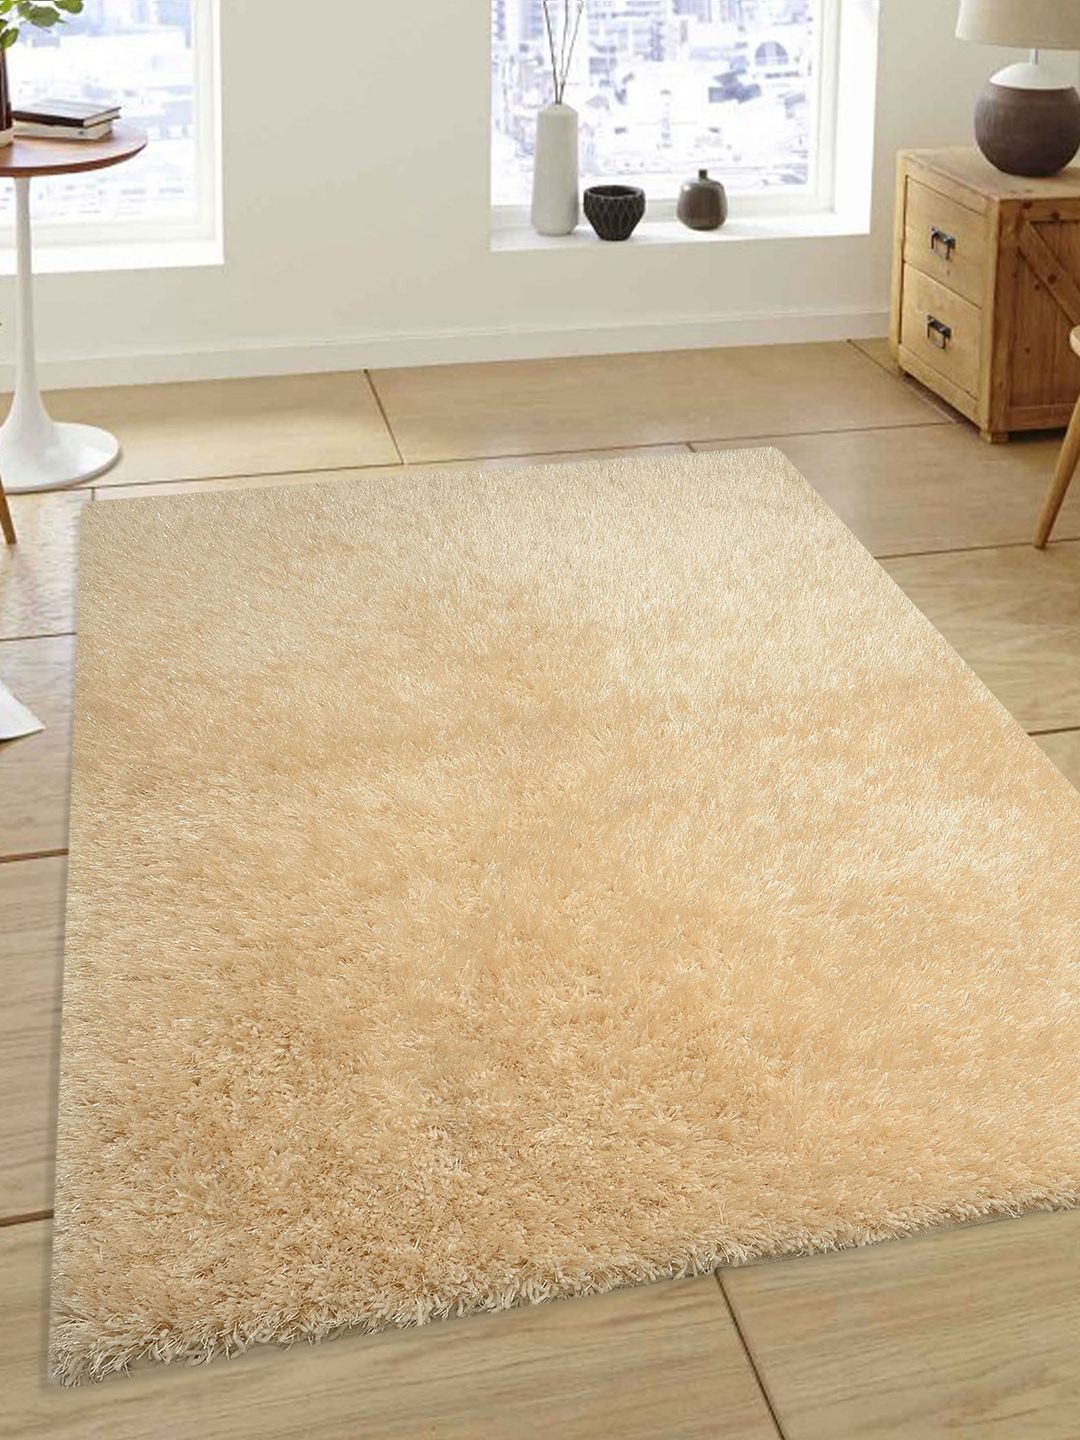 Saral Home Cream-Coloured Soft Smooth Feeling Heavy Duty Saggy Carpet Price in India